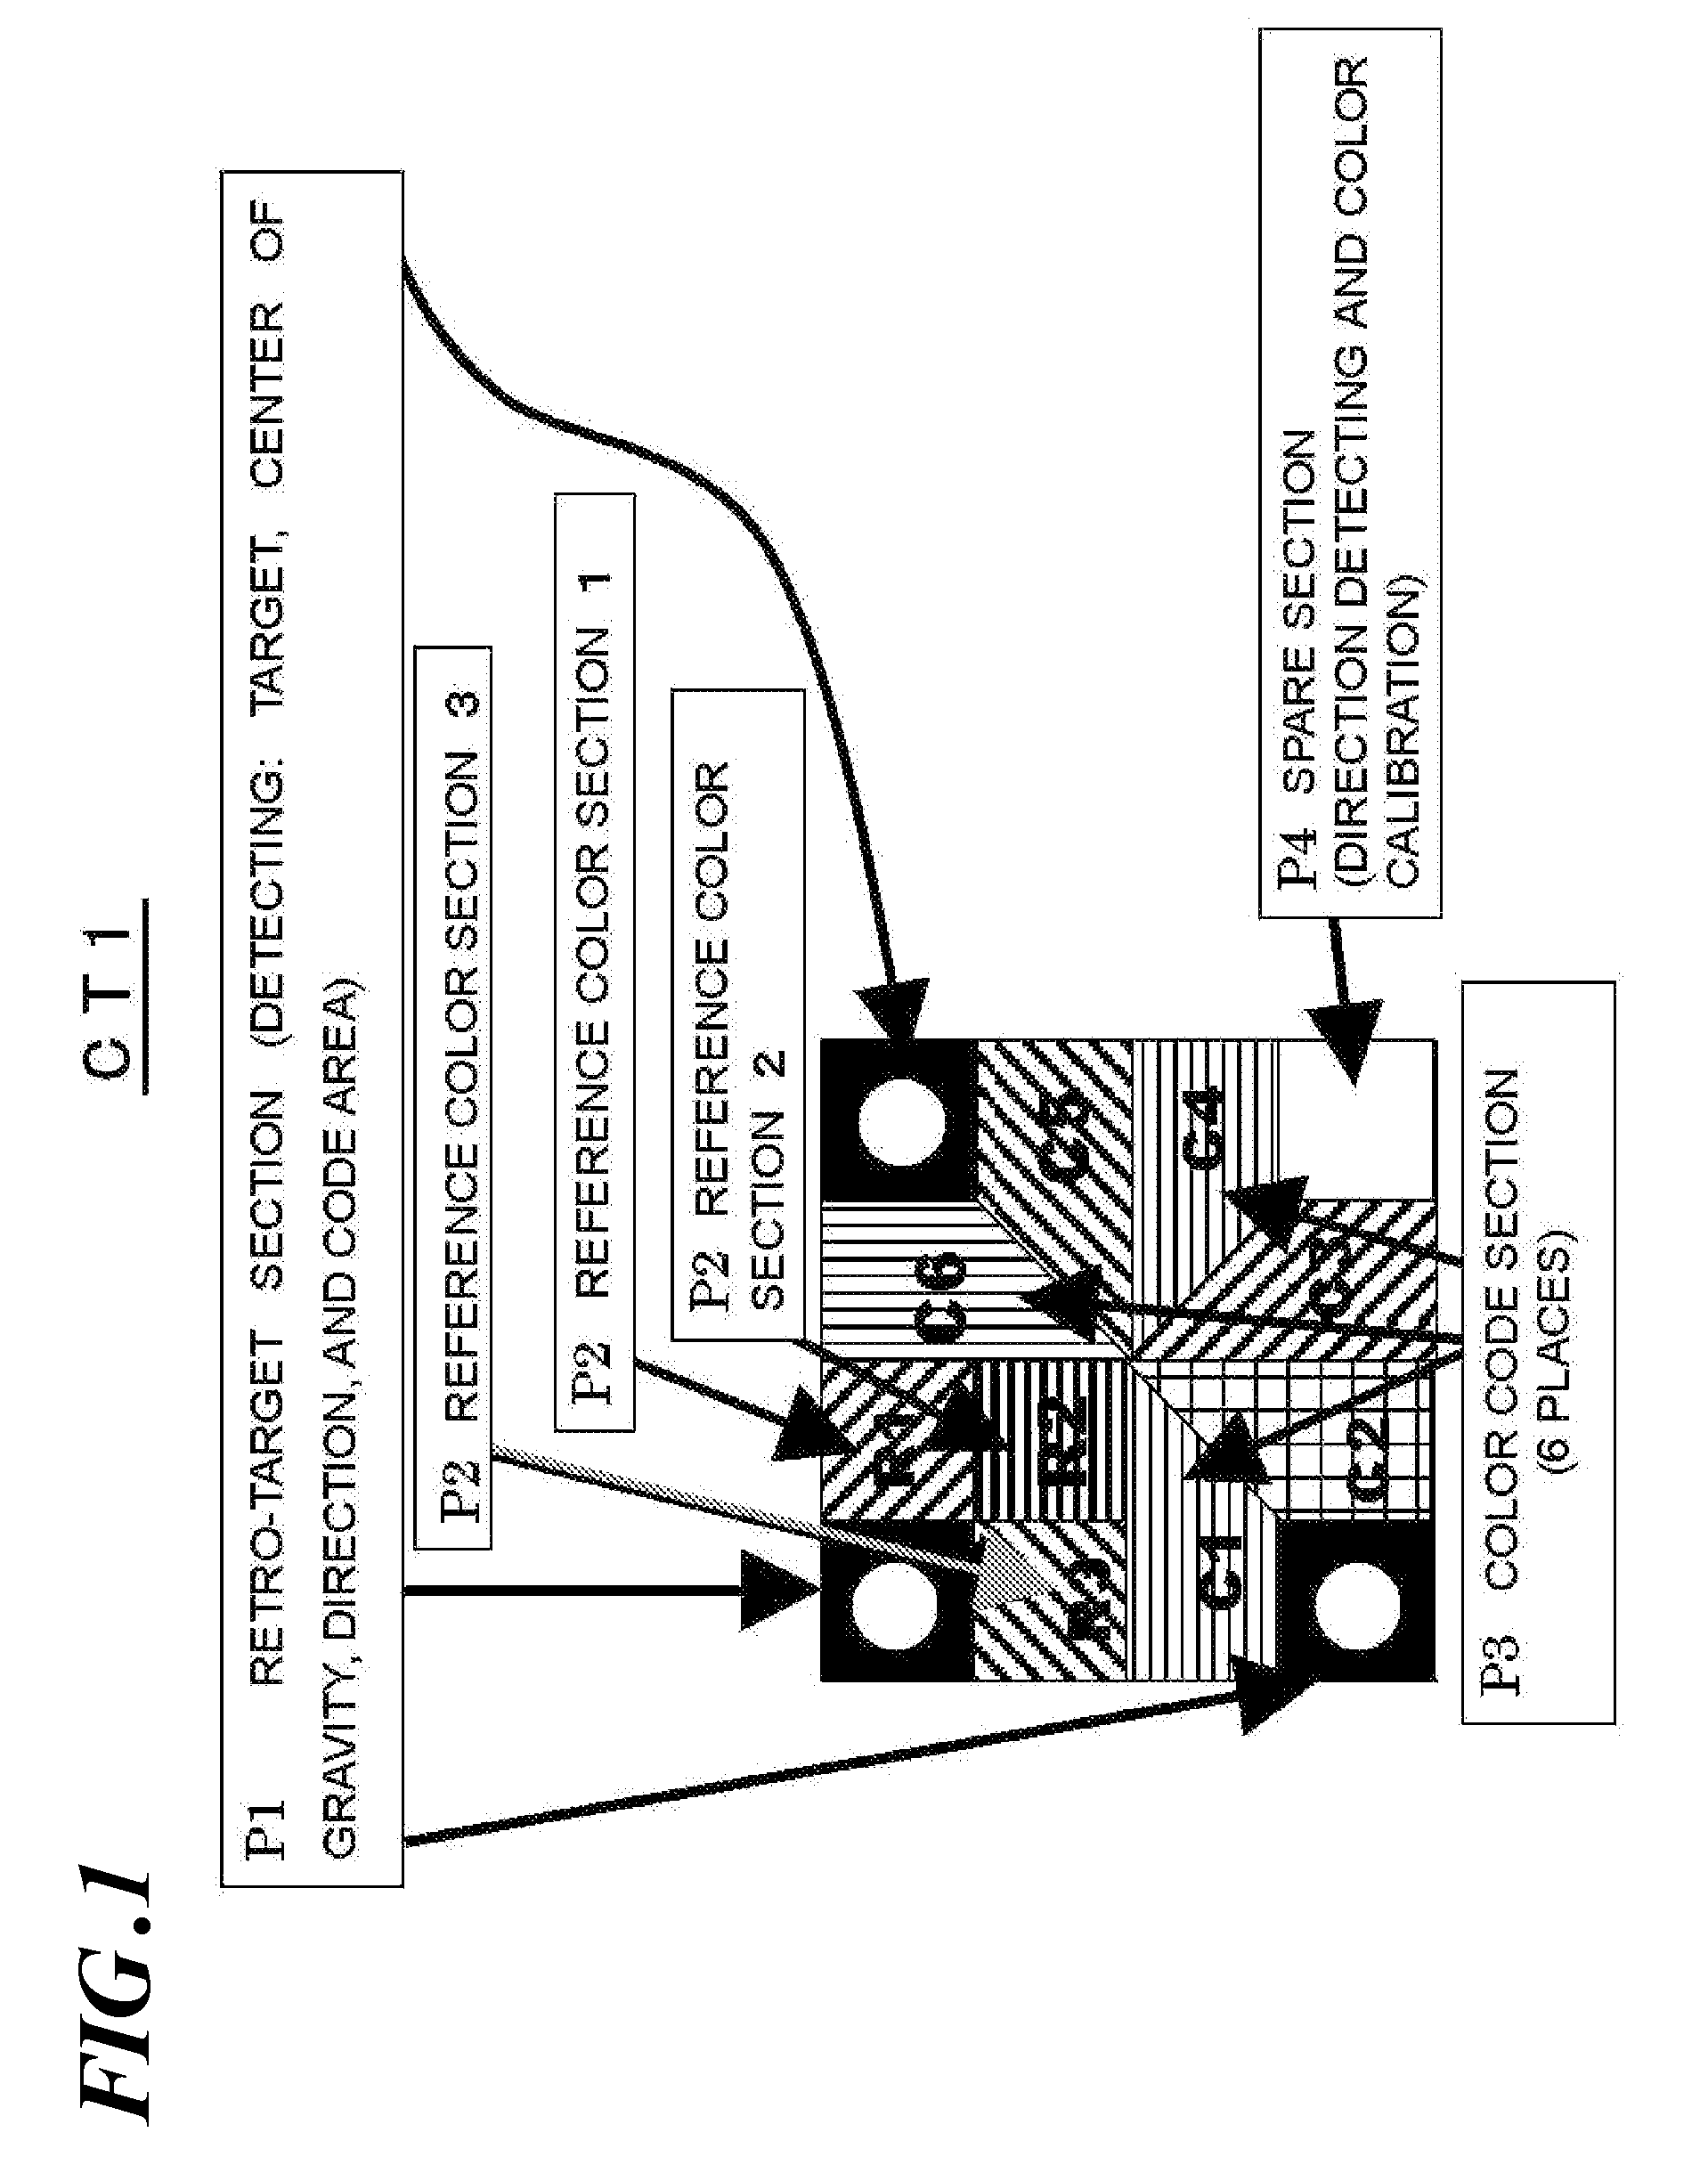 Color-coded target, color code extracting device, and three-dimensional measuring system